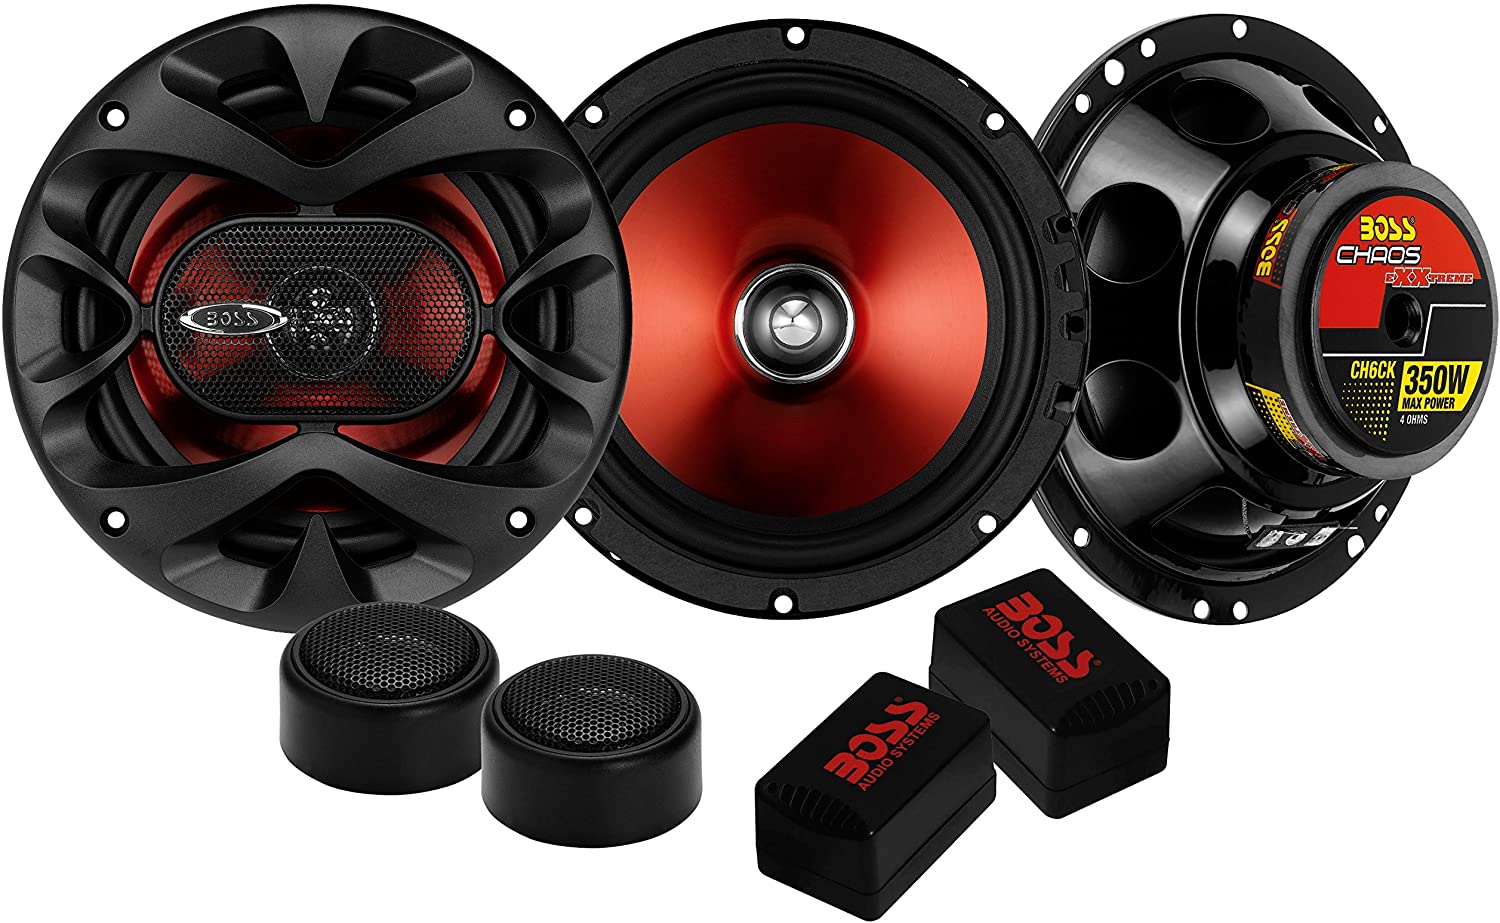 BOSS CH6530 component Car Speakers Best 6.5 Component Speakers Under $200